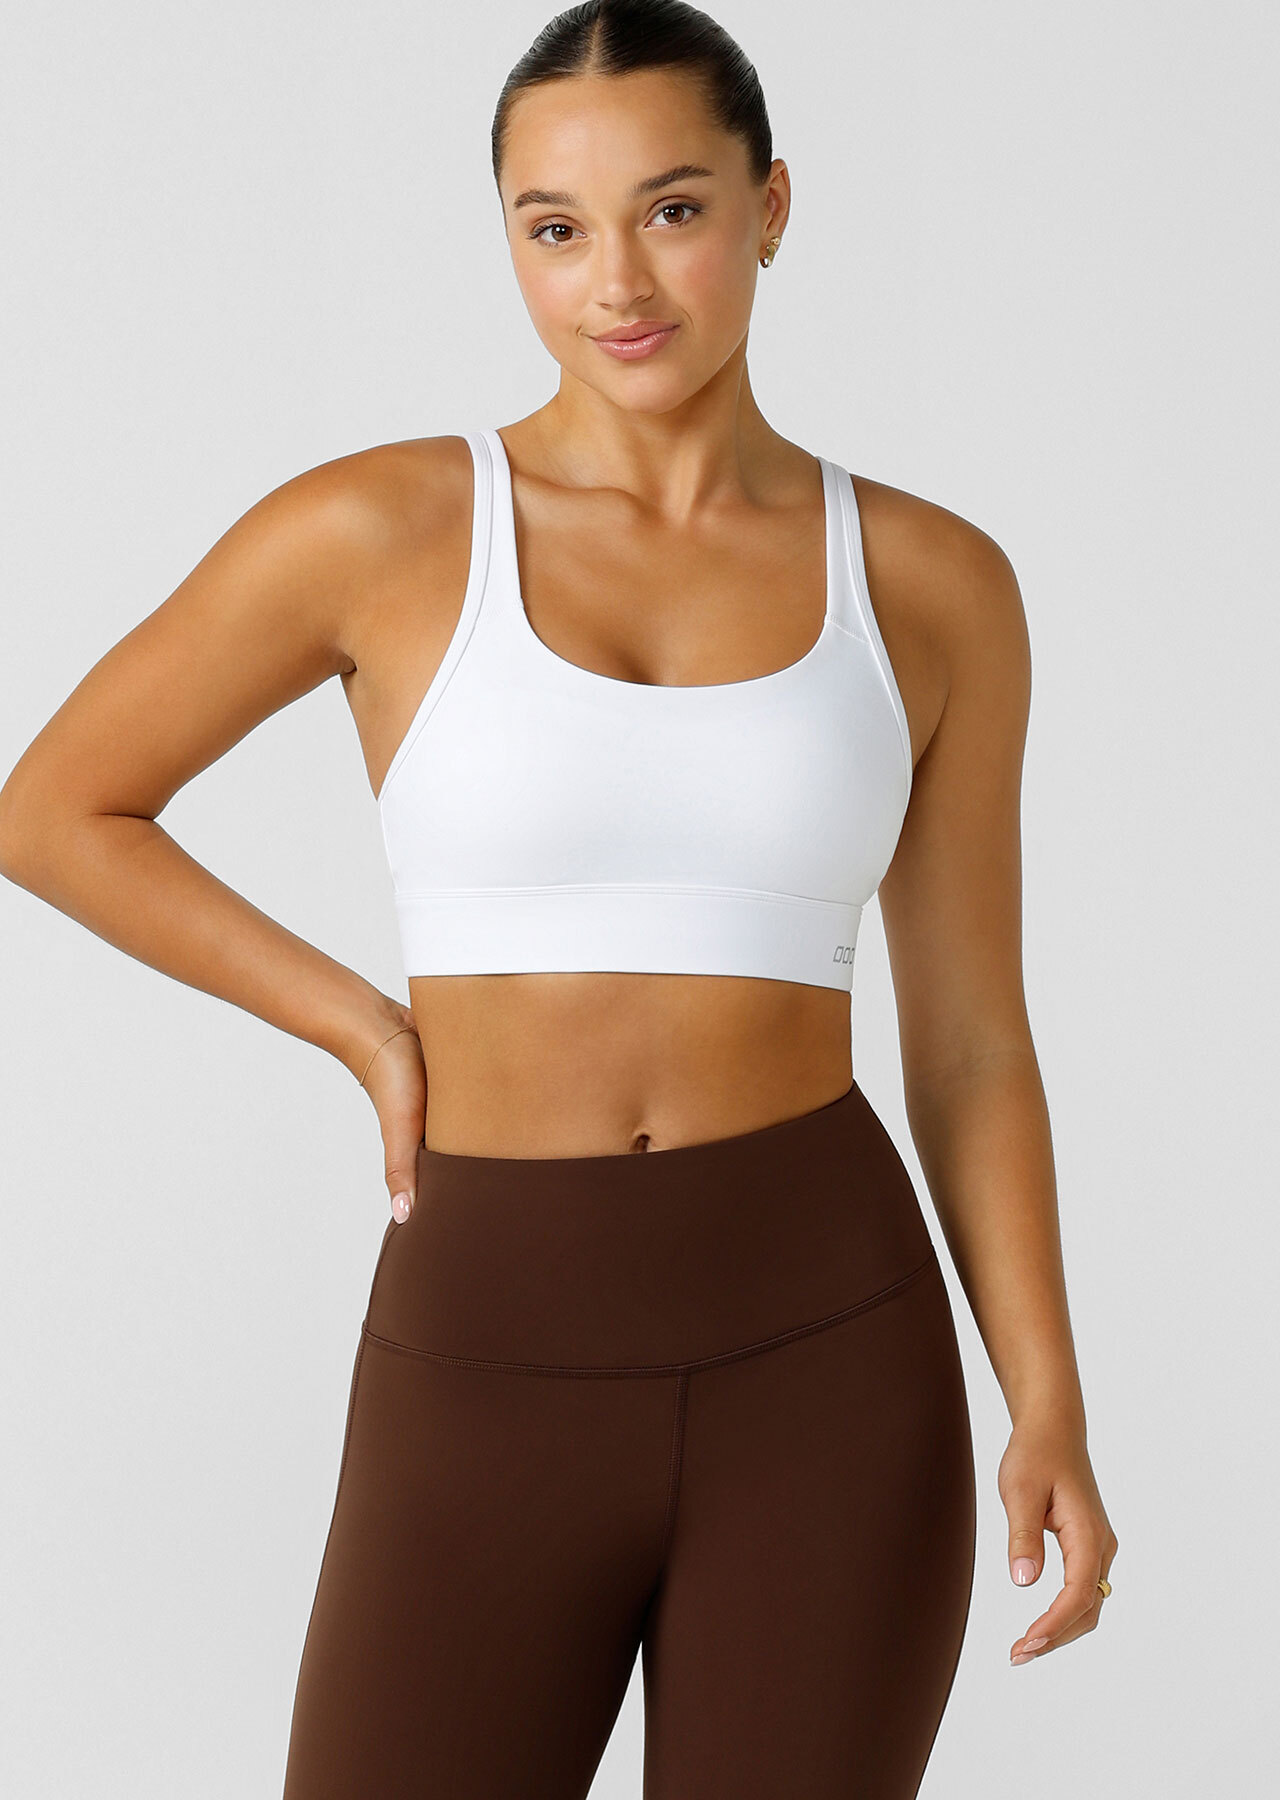 Women's Stretchy Sculpt Sports Bra, Milky White, Medium : :  Clothing, Shoes & Accessories